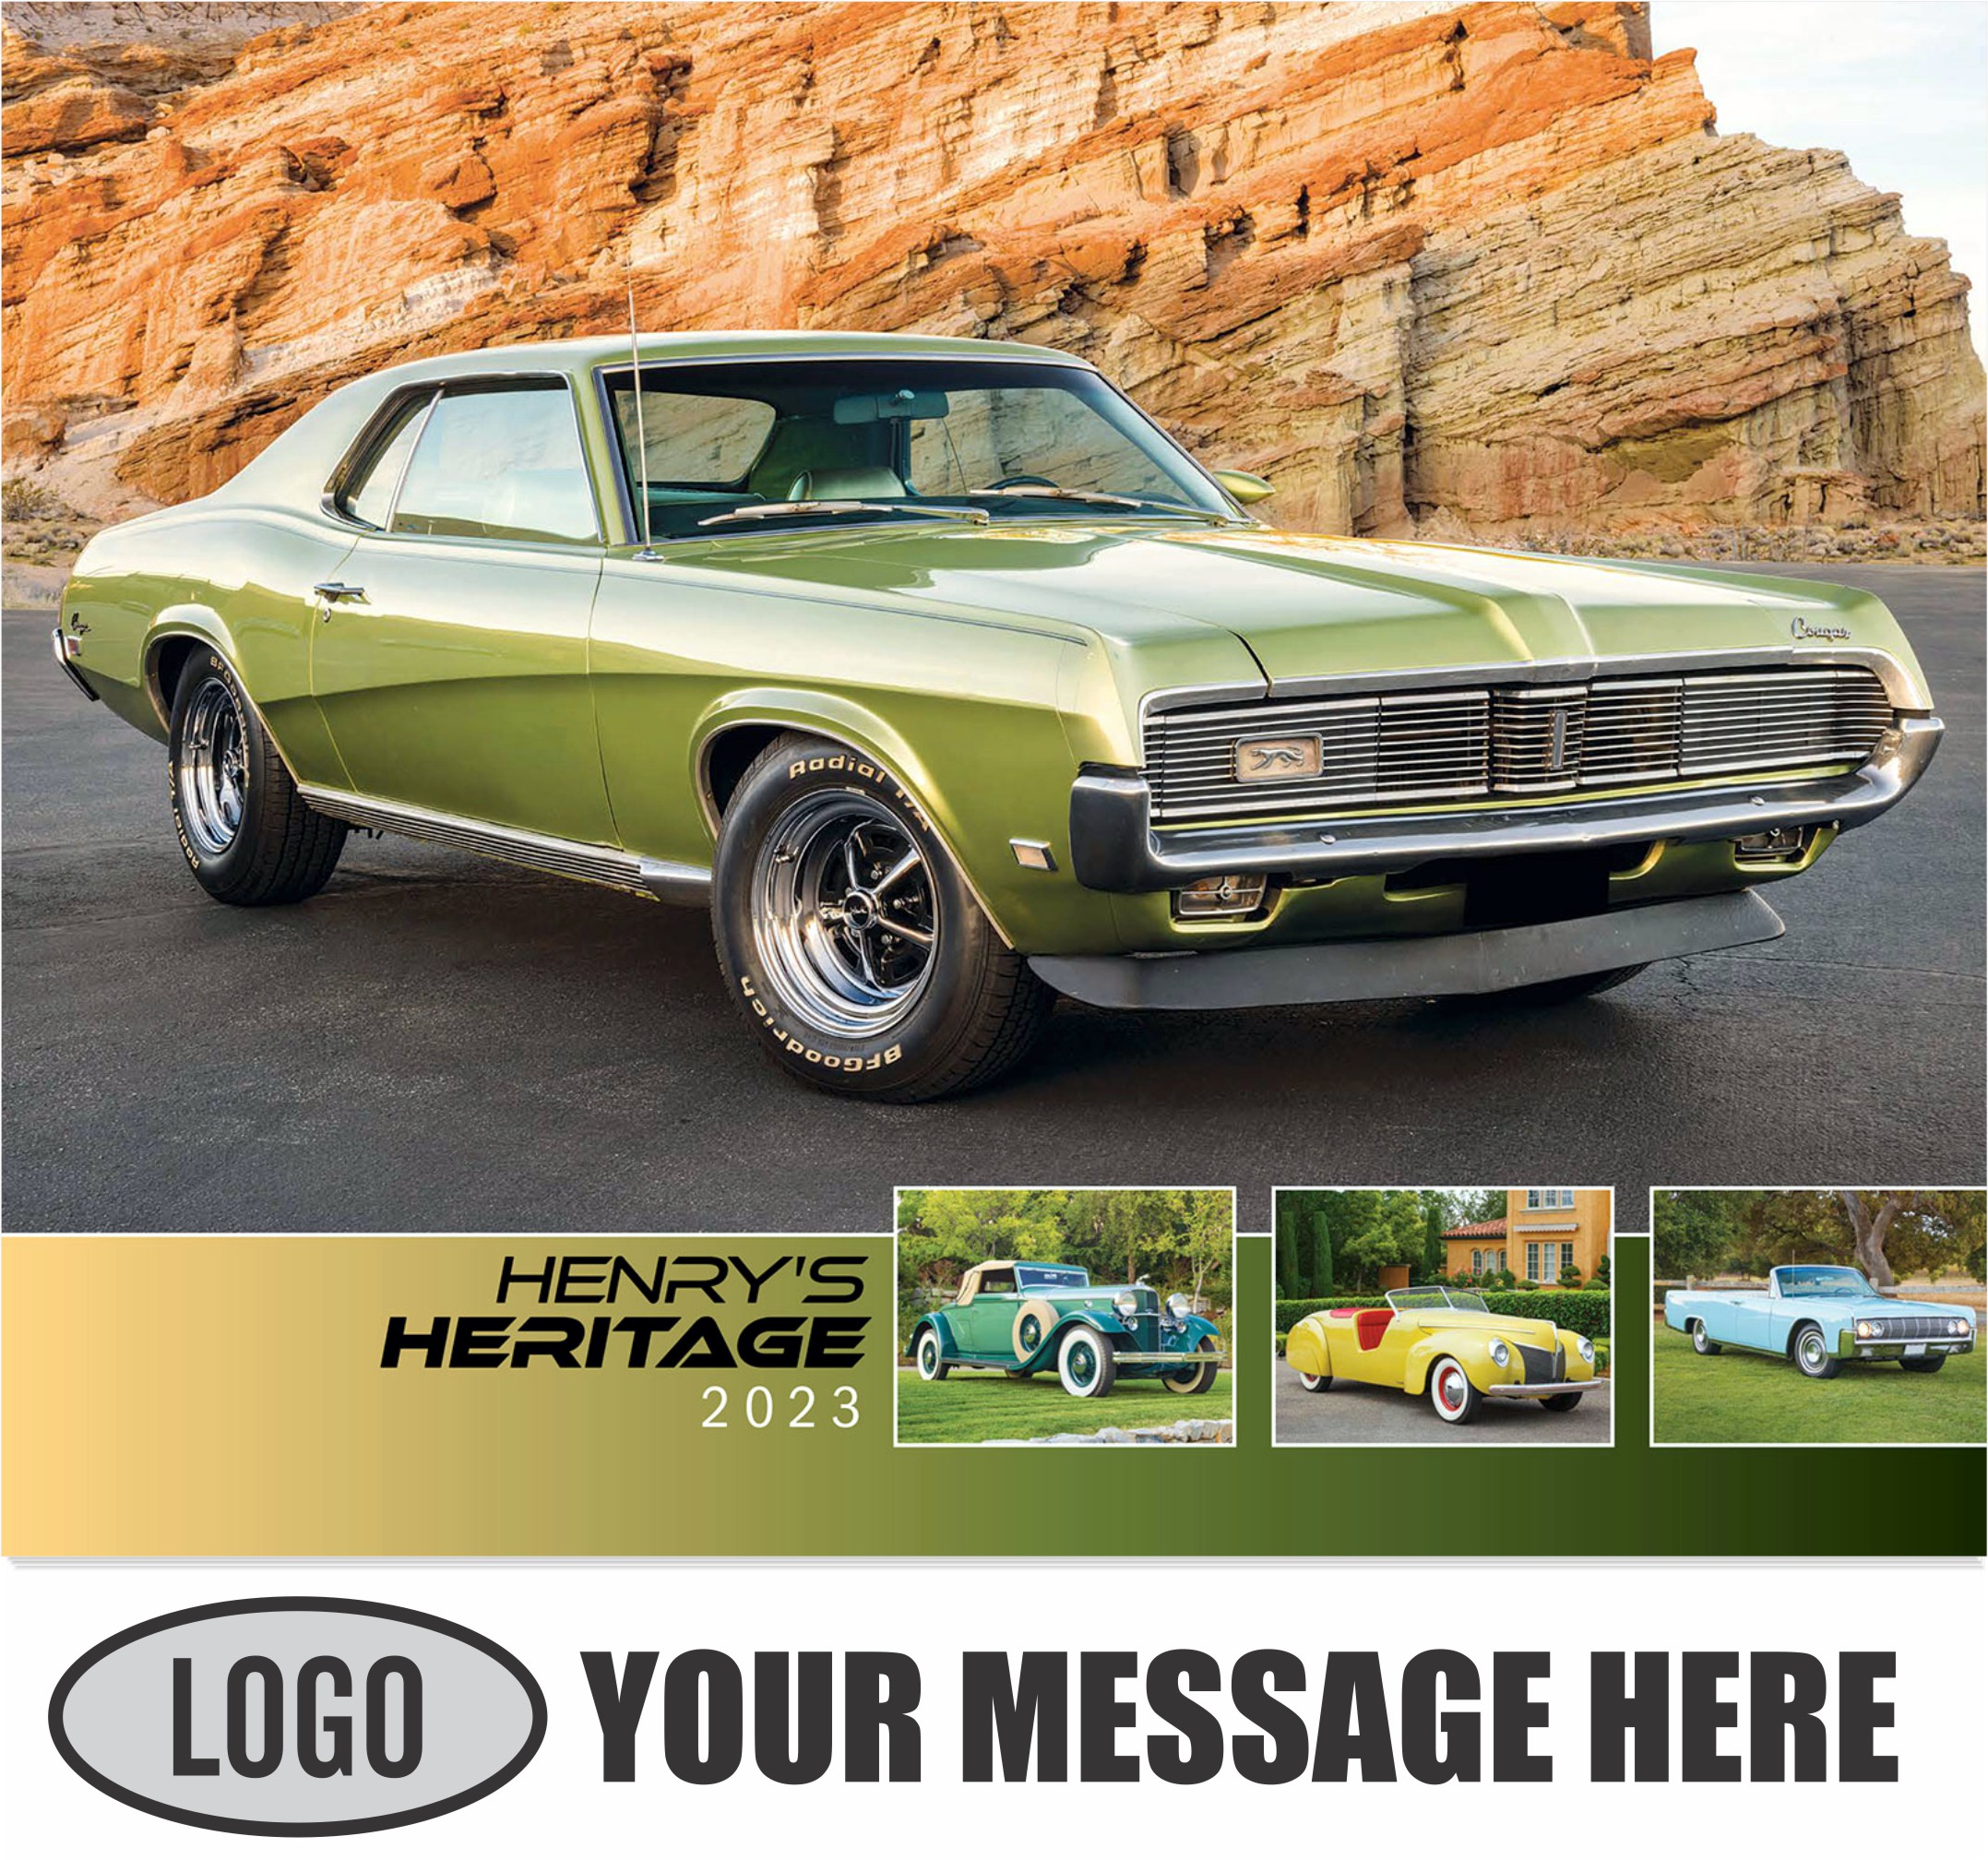 2023 Henry's Heritage Ford Cars Promotional Calendar